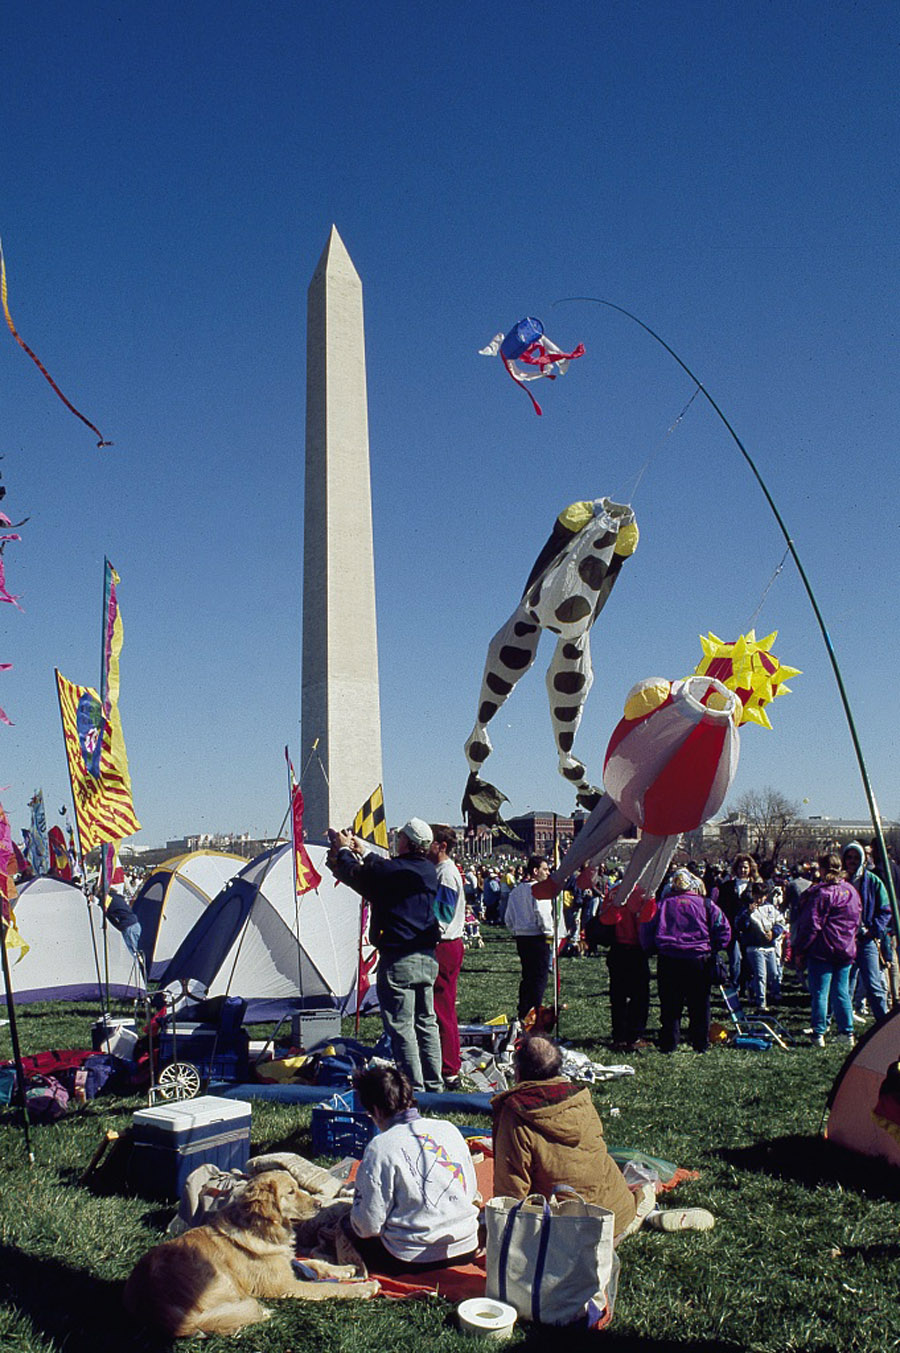 The National Kite Festival continues to draw children of all ages each spring (Photo courtesy Carol Highsmith/Library of Congress)